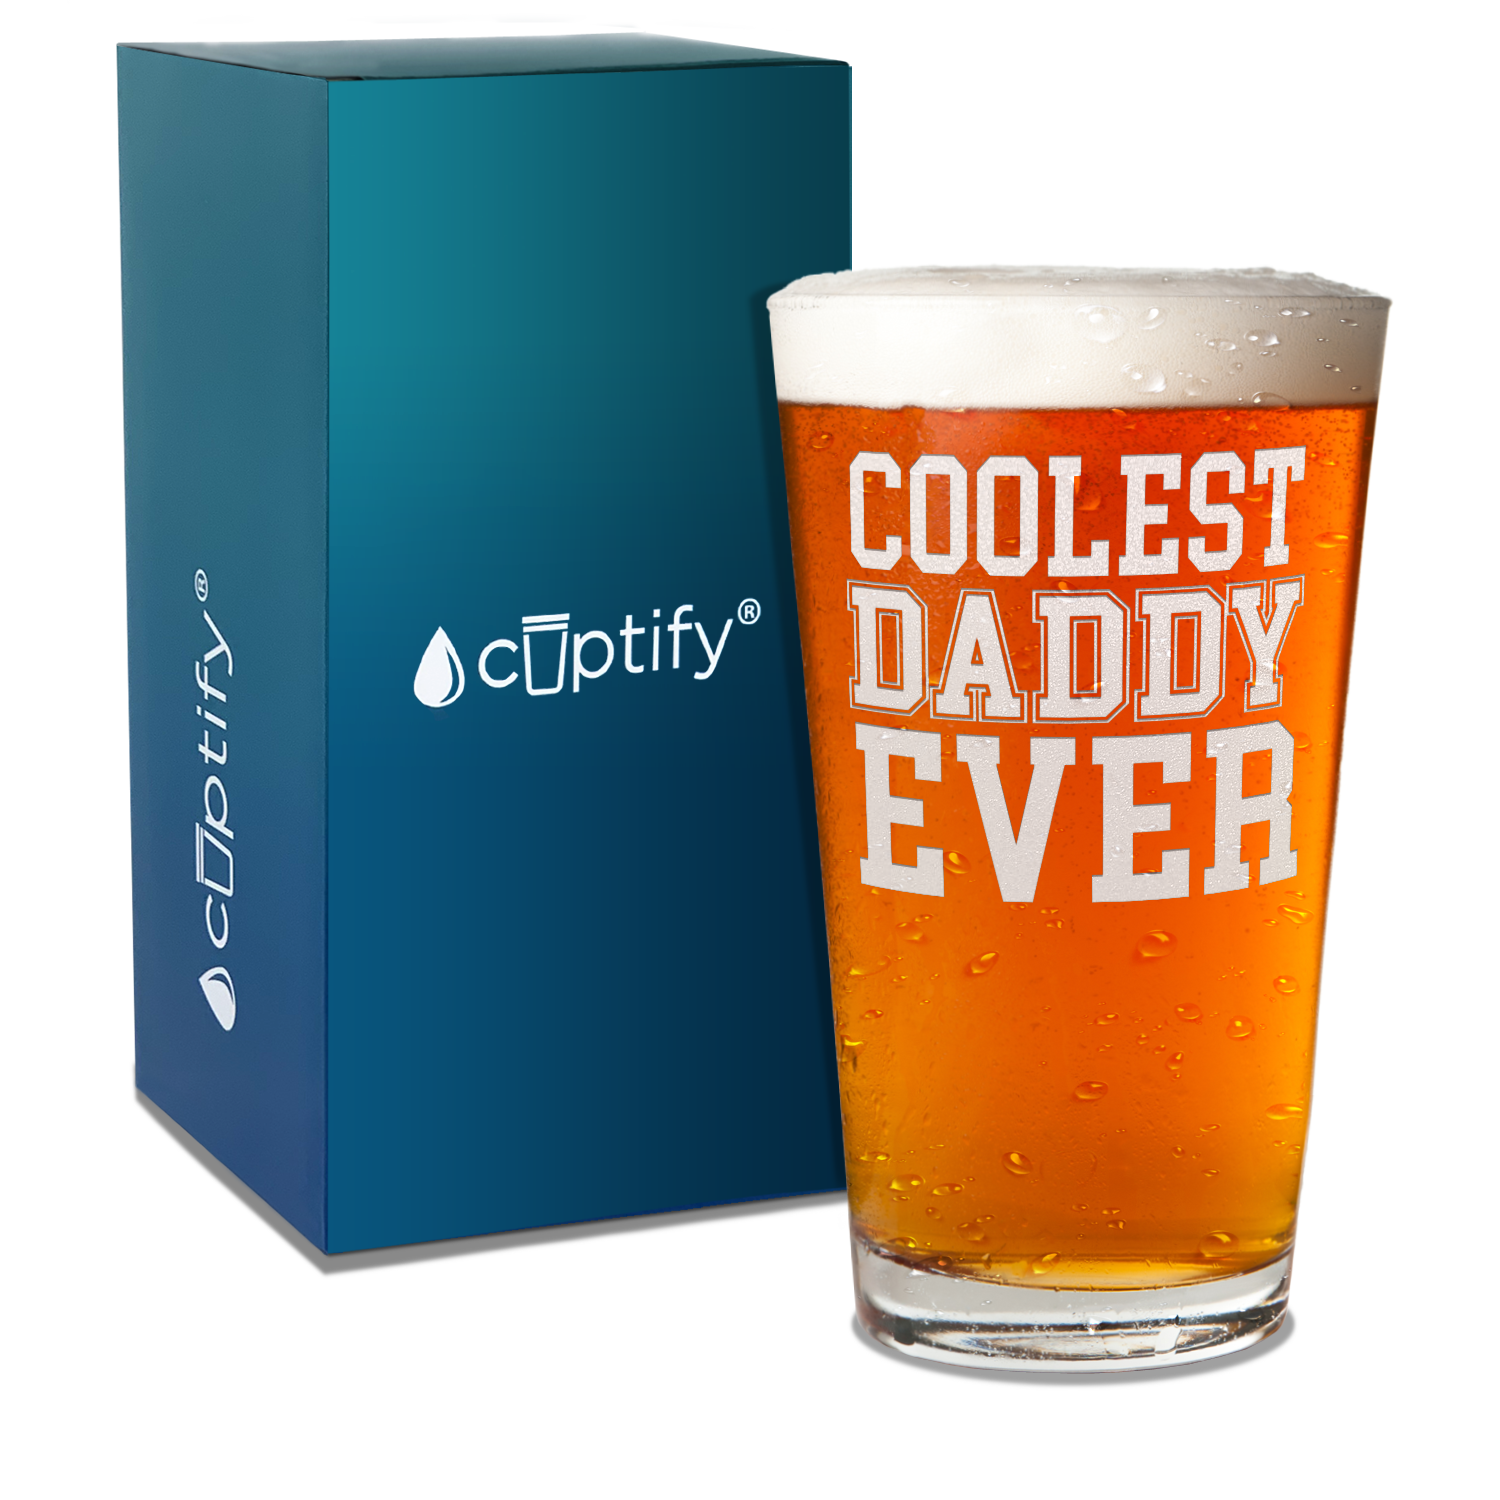 Coolest Daddy Ever Engraved Beer Pint Glass